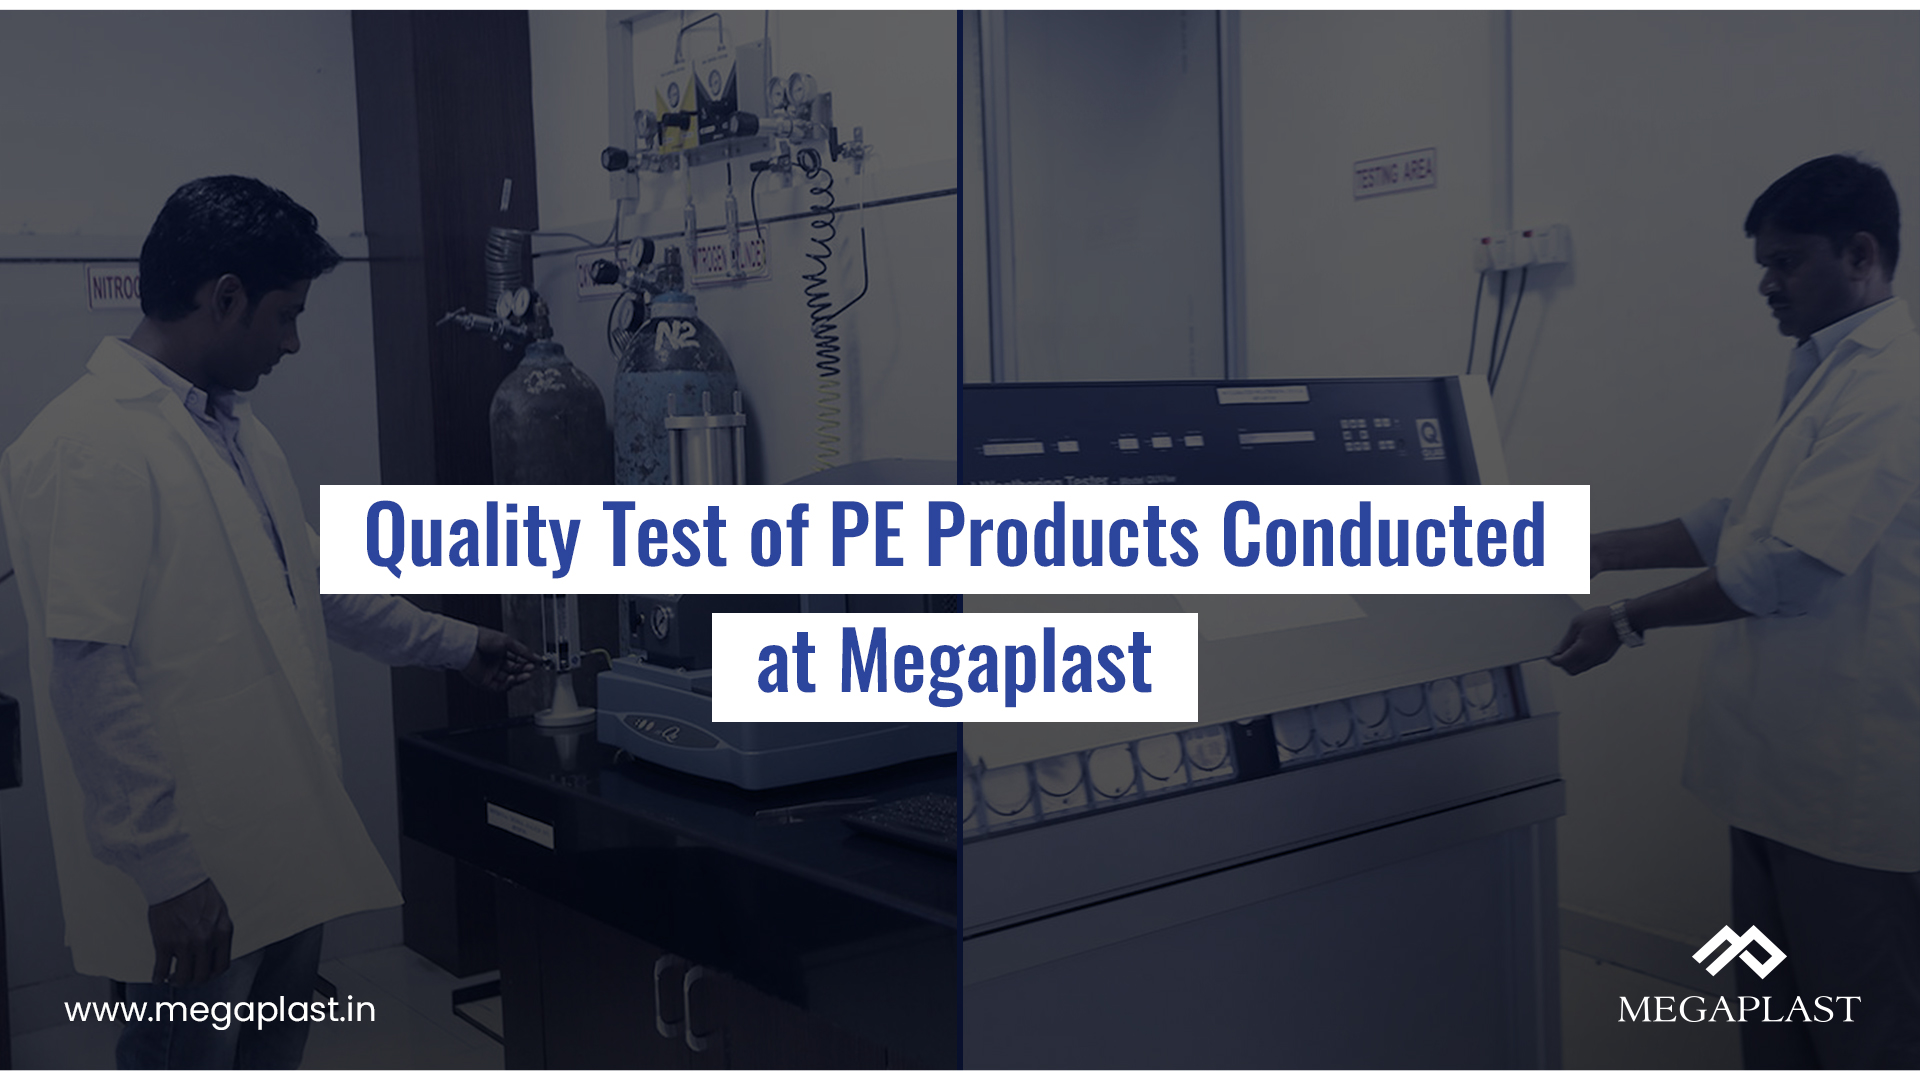 Quality test of PE products conducted at Megaplast